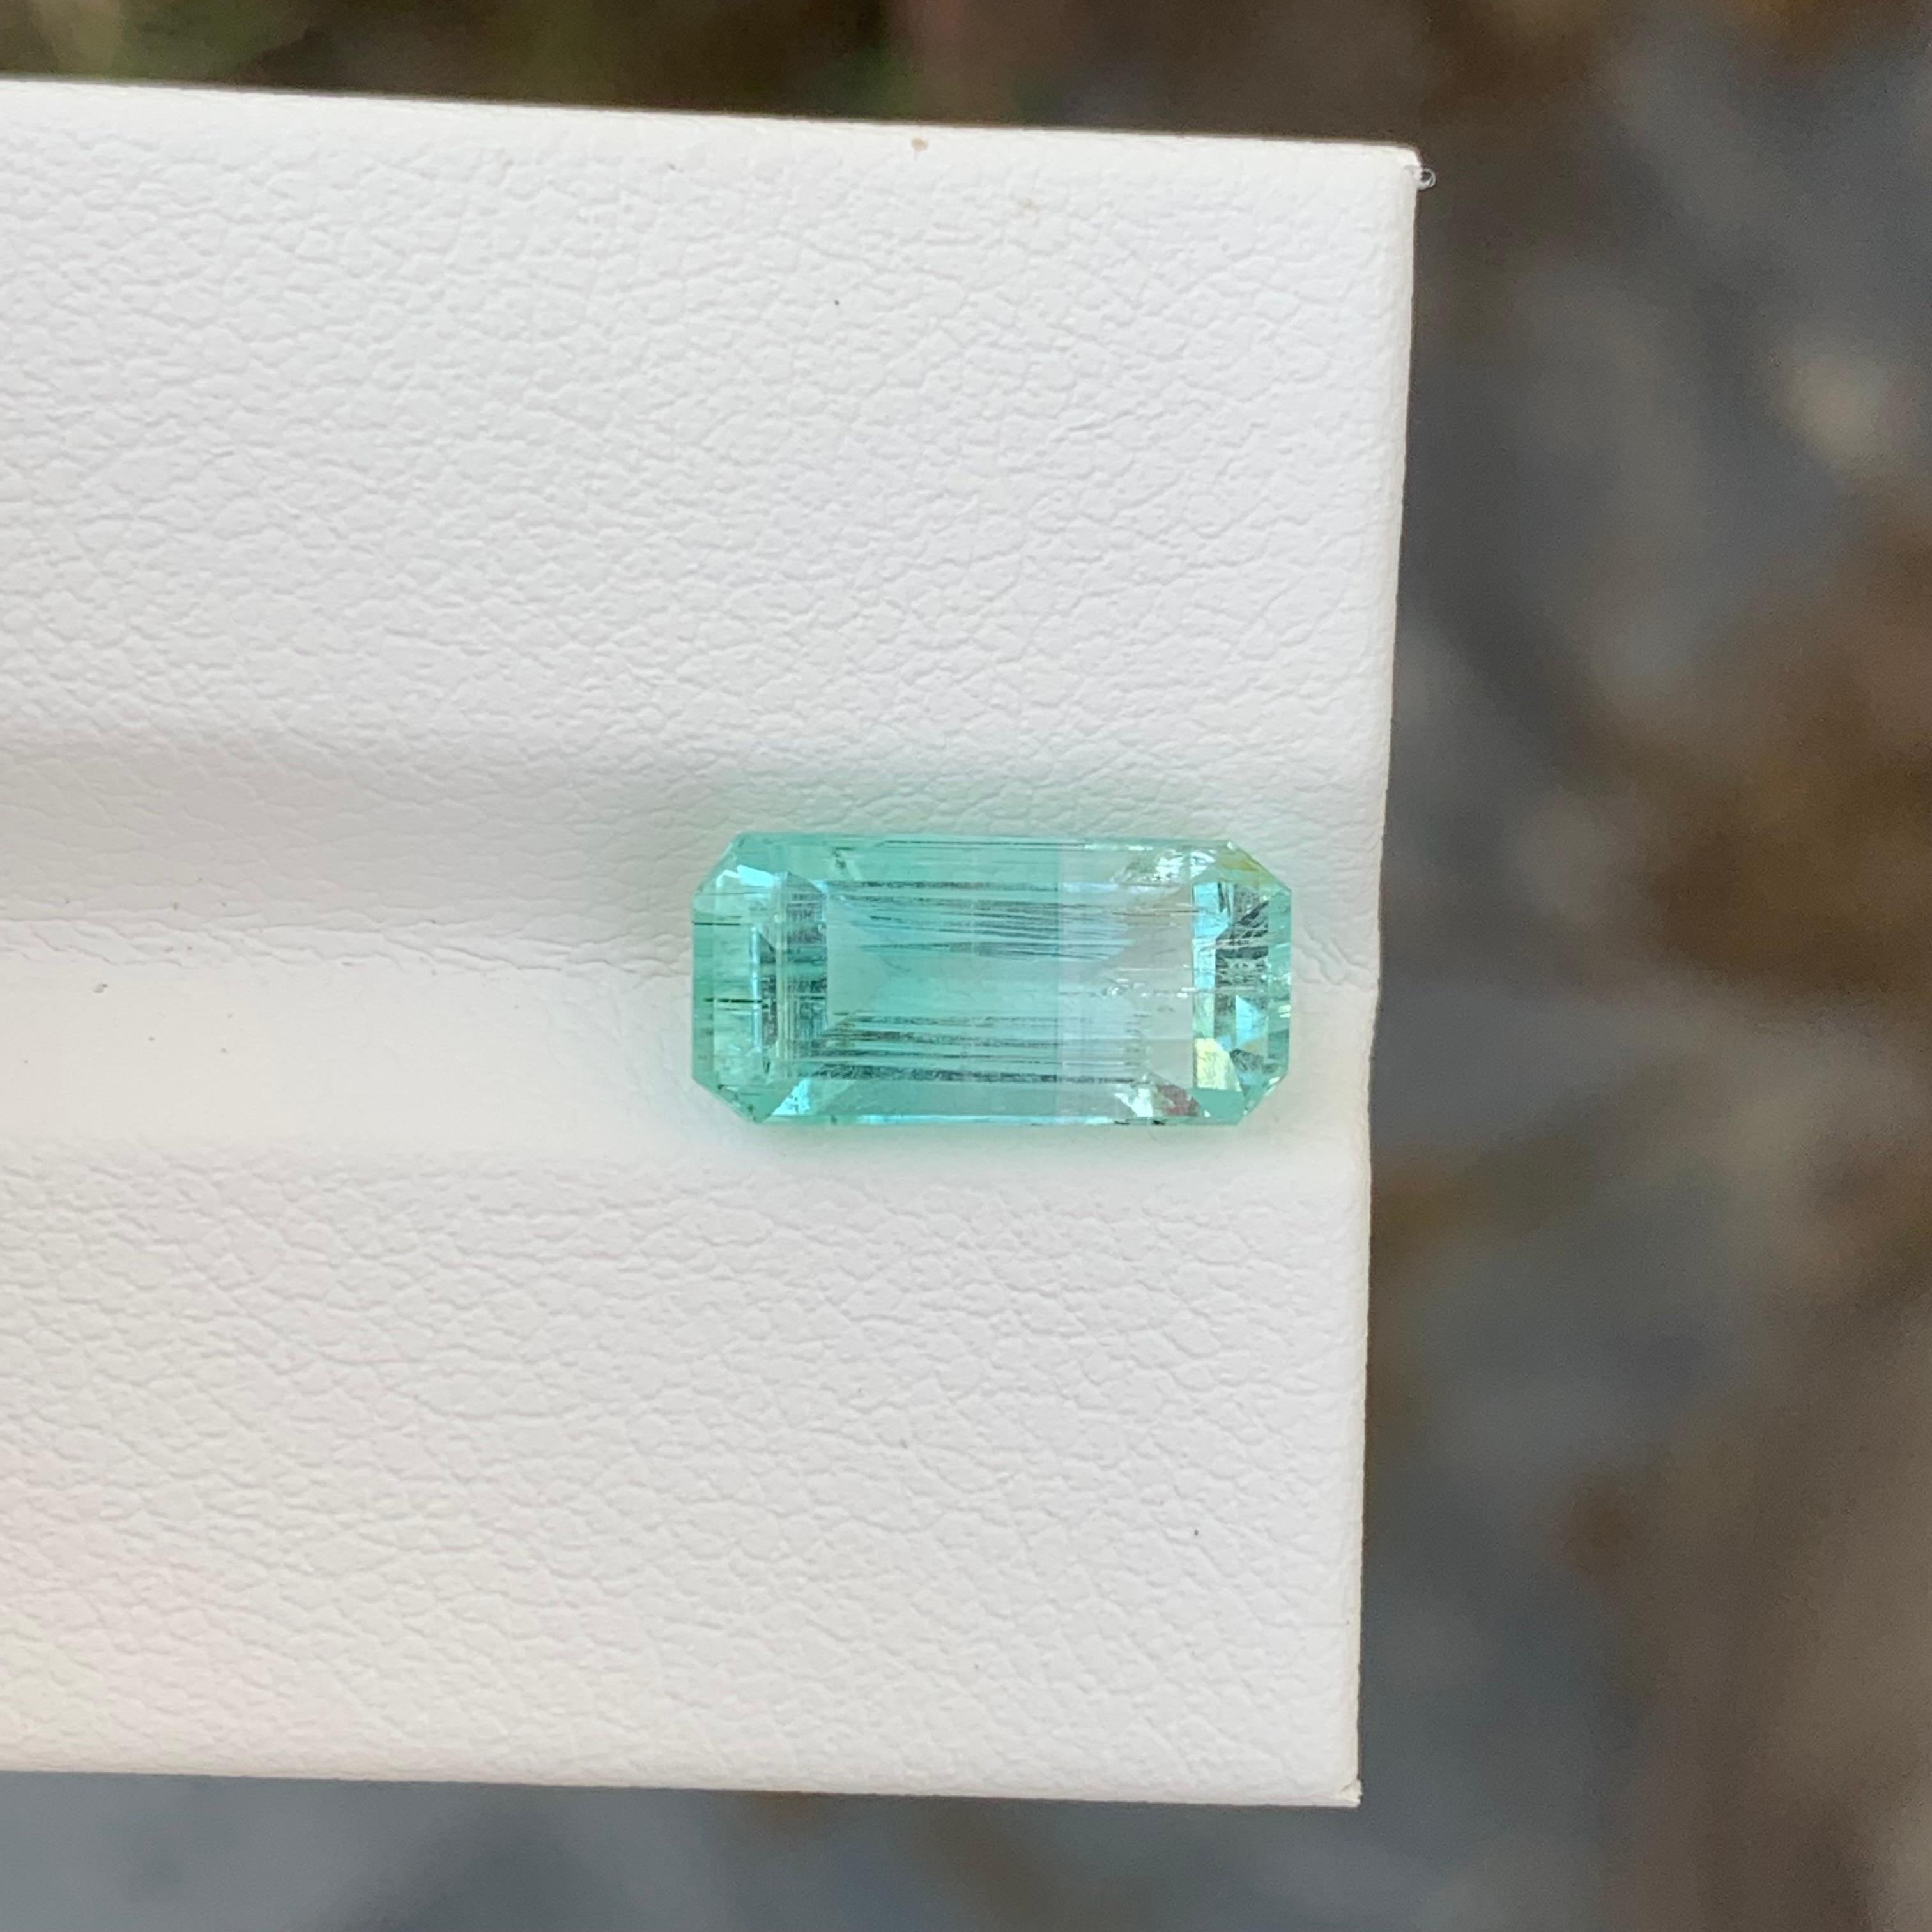 Loose Emerald
Weight: 2.85 Carat
Dimension: 12.1 x 5.9 x 5.1 Mm
Origin: Chitral, Pakistan
Treatment: Non
Certificate: On Demand
Shape: Emerald


Emerald, with its lush green hue, has captivated hearts and minds for centuries. Renowned for its